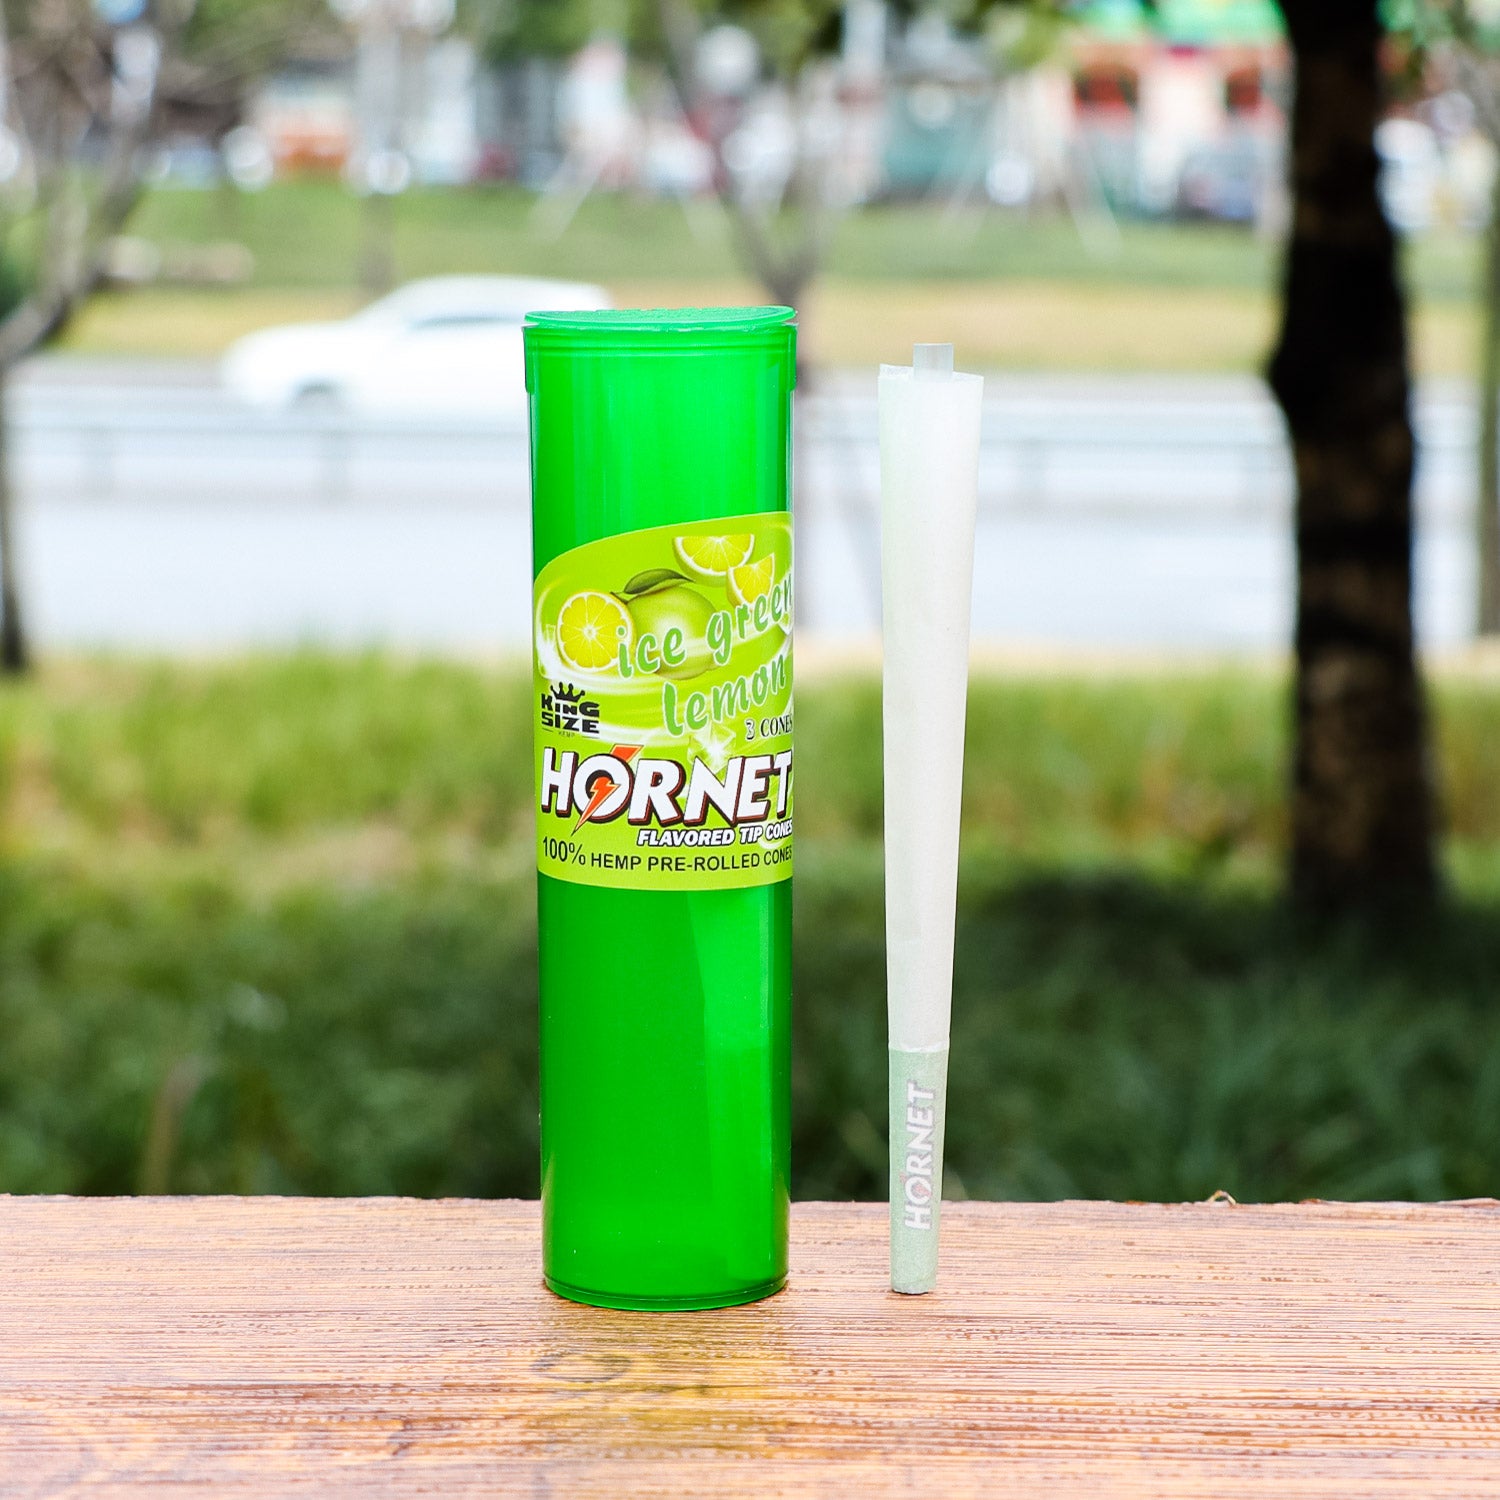 HORNET Ice Green Lemon Flavors Pre Rolled Cones, King Size Pre Rolled Rolling Paper With Tips, Slow Burning Rolling Cones & Flavored Pop, 3 PCS / Tube, 12 Tubes / Box